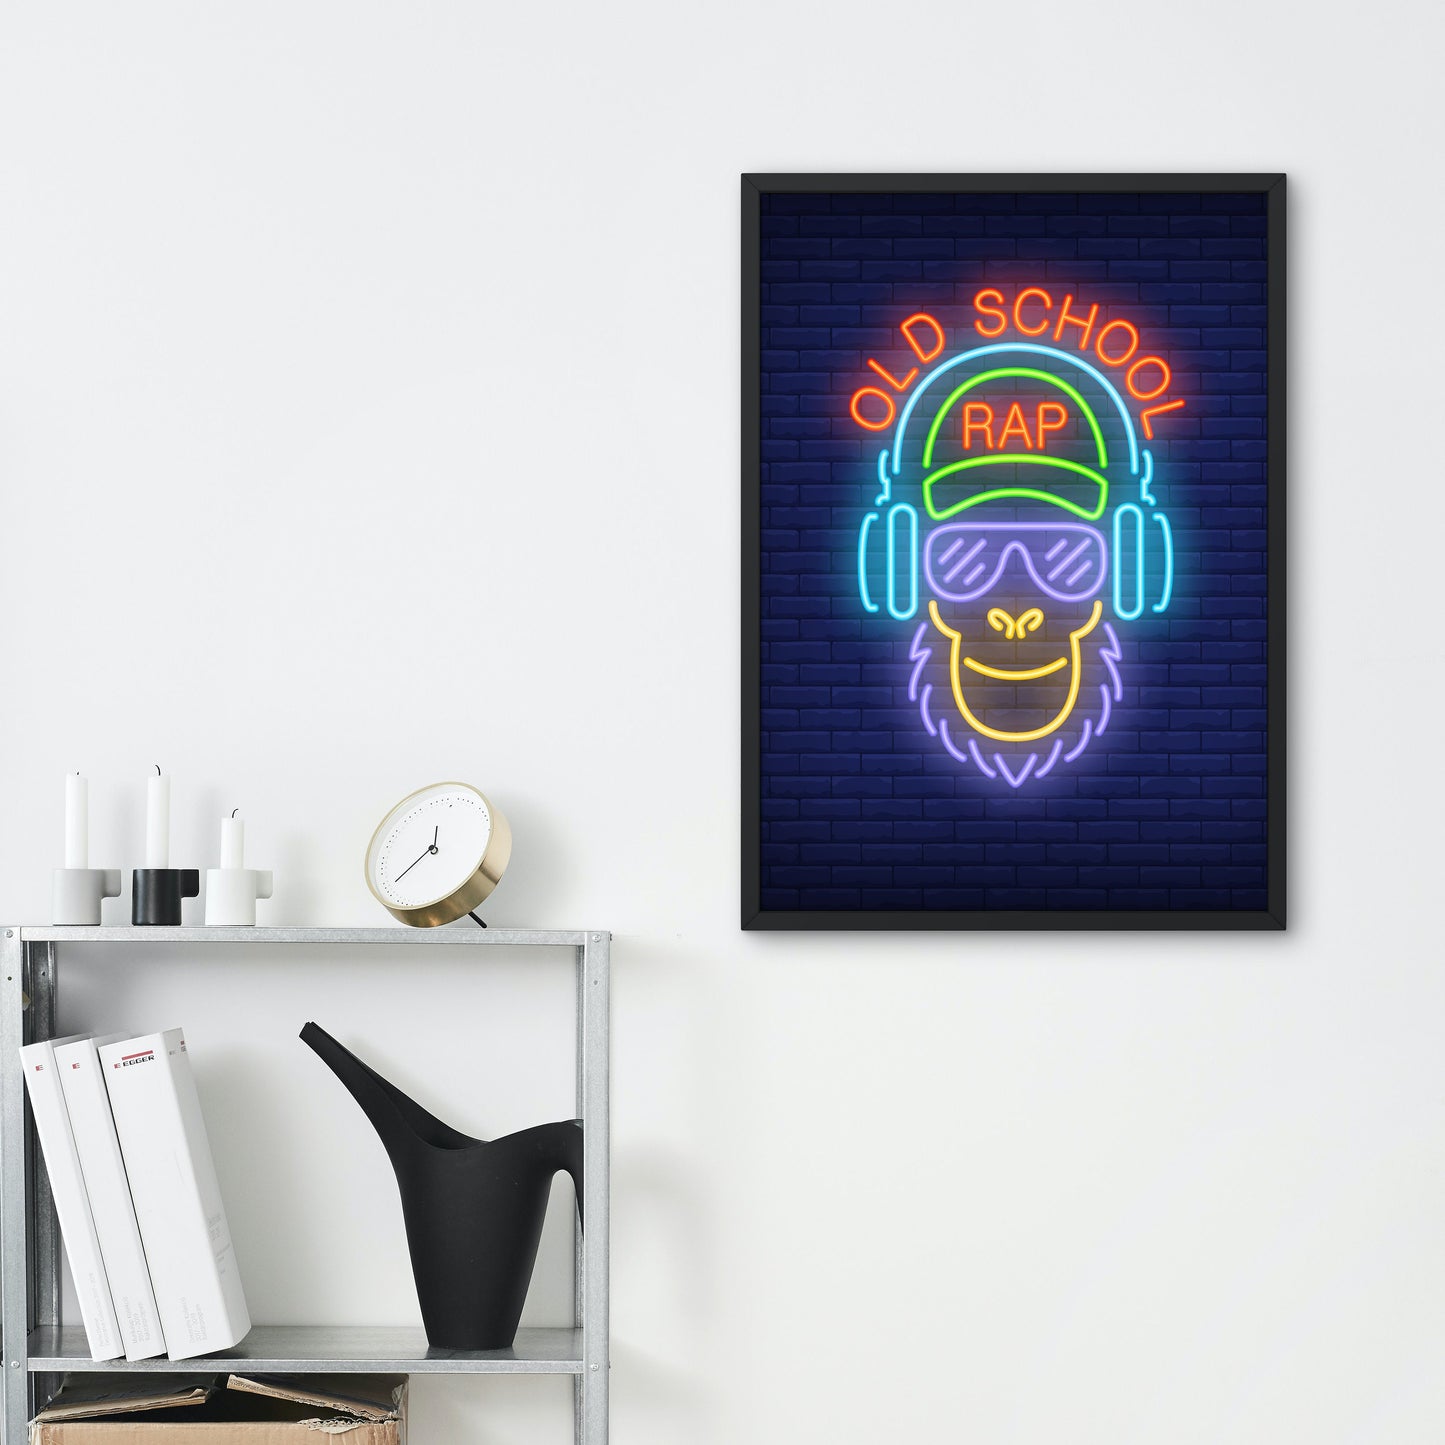 Neon Eclectic Gallery Set of 7 PRINTABLE, Trendy Art Prints, Printable urban wall art, Colorful street art posters, Abstract Funky wall art